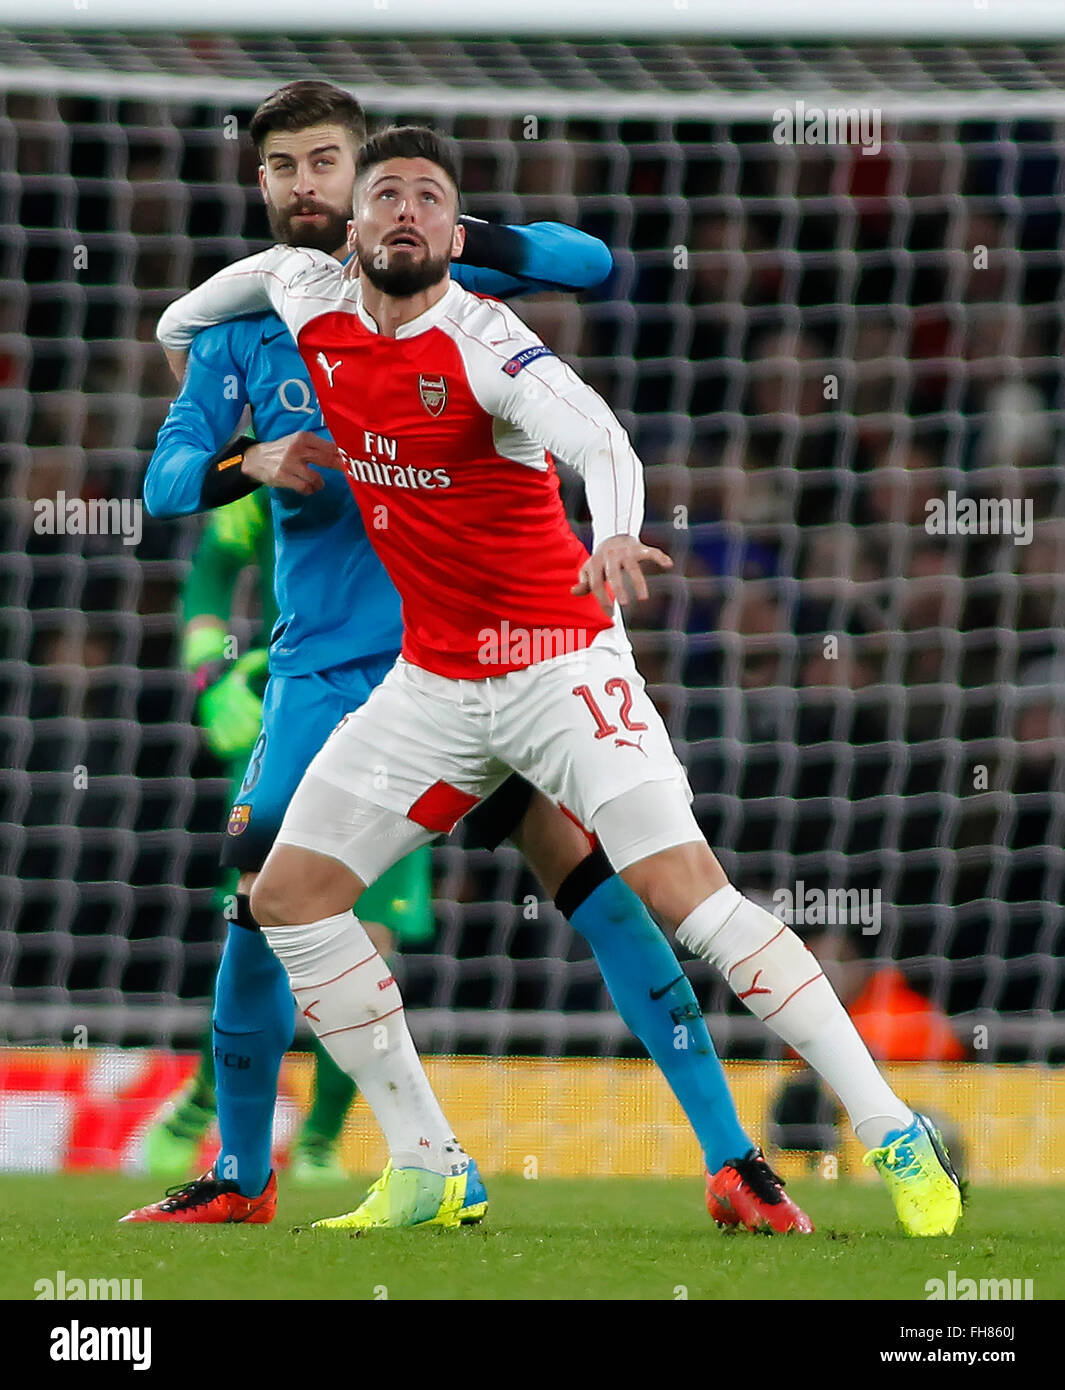 London, UK. 23rd Feb, 2016. Gerard Pique of Barcelona and Olivier Giroud of Arsenal compete for the ball during the Champions League match between Arsenal and Barcelona at The Emirates Stadium on February 23, 2016 in London, United Kingdom. Credit:  Mitchell Gunn/ESPA/Alamy Live News Stock Photo